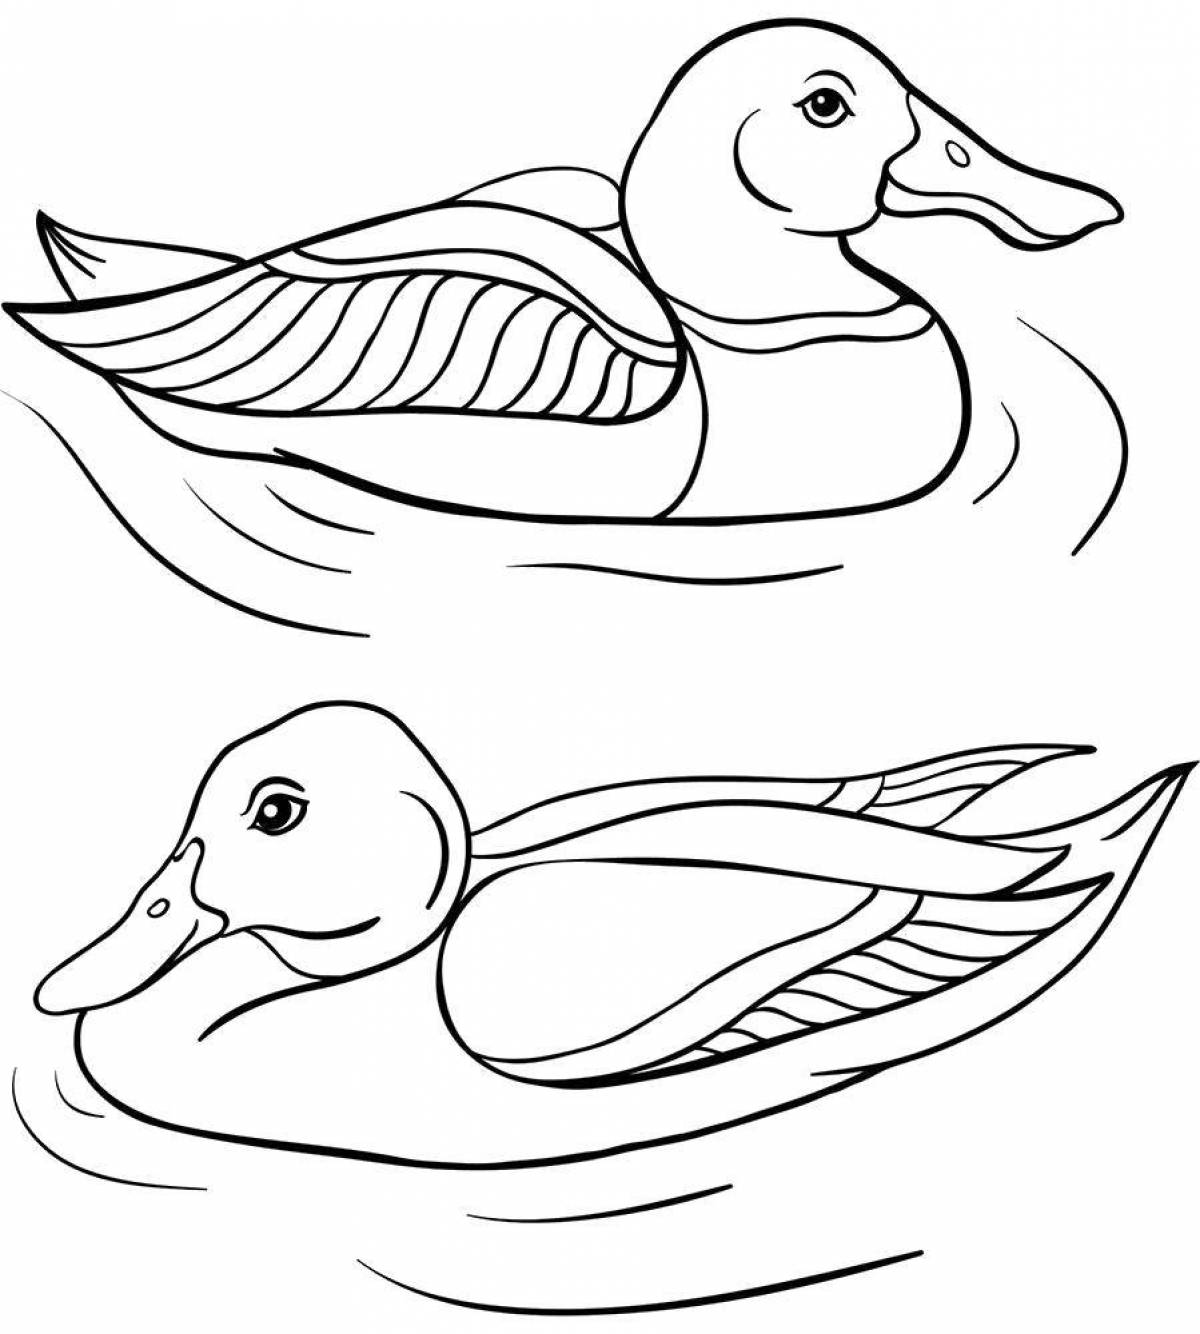 Colorful wild duck coloring book for kids